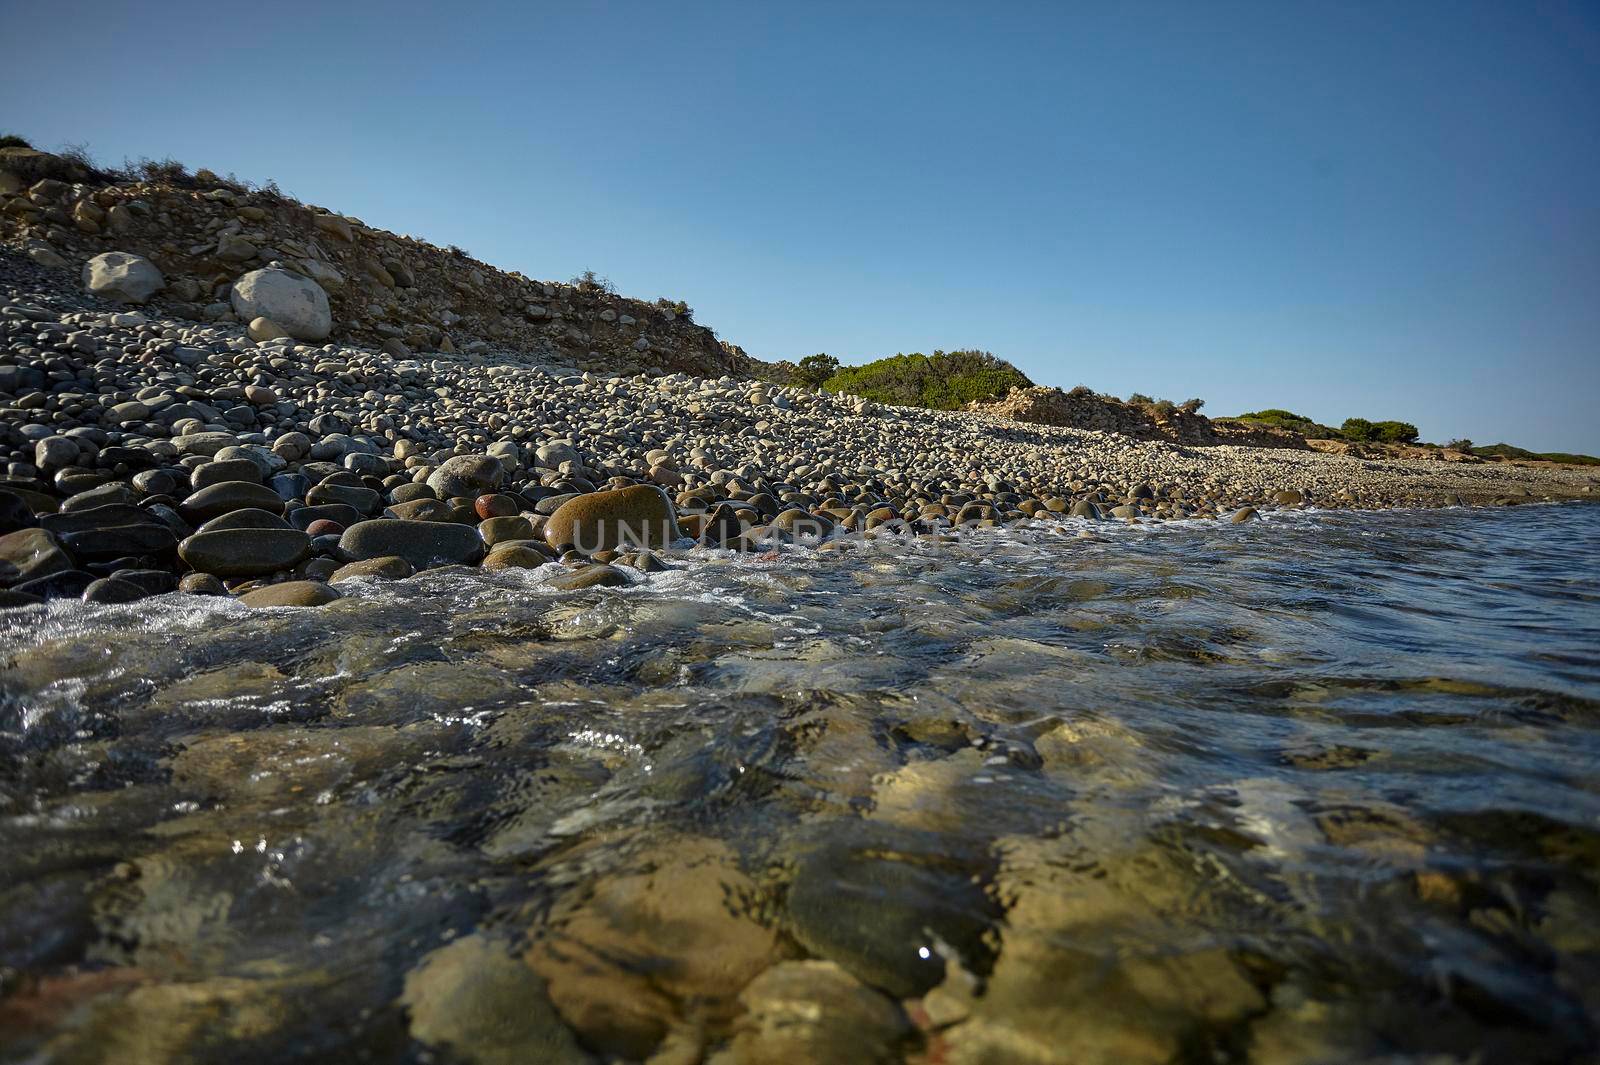 The crystalline water of the southern sea of Sardinia meets with the rocky beach breaking on the pebble stones.